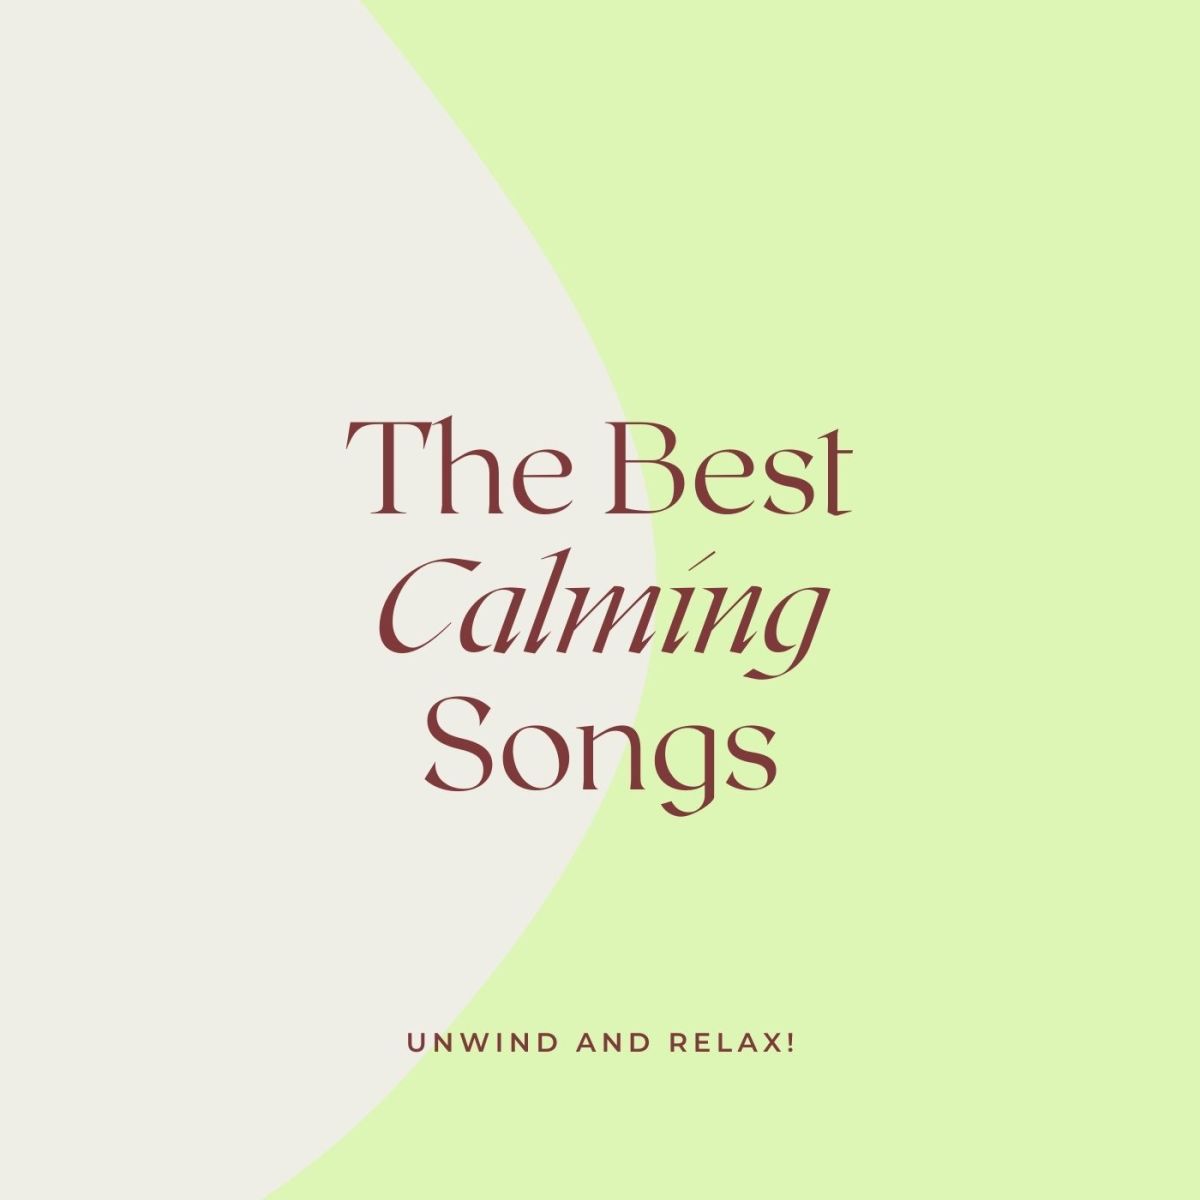 Songs That Calm You Down